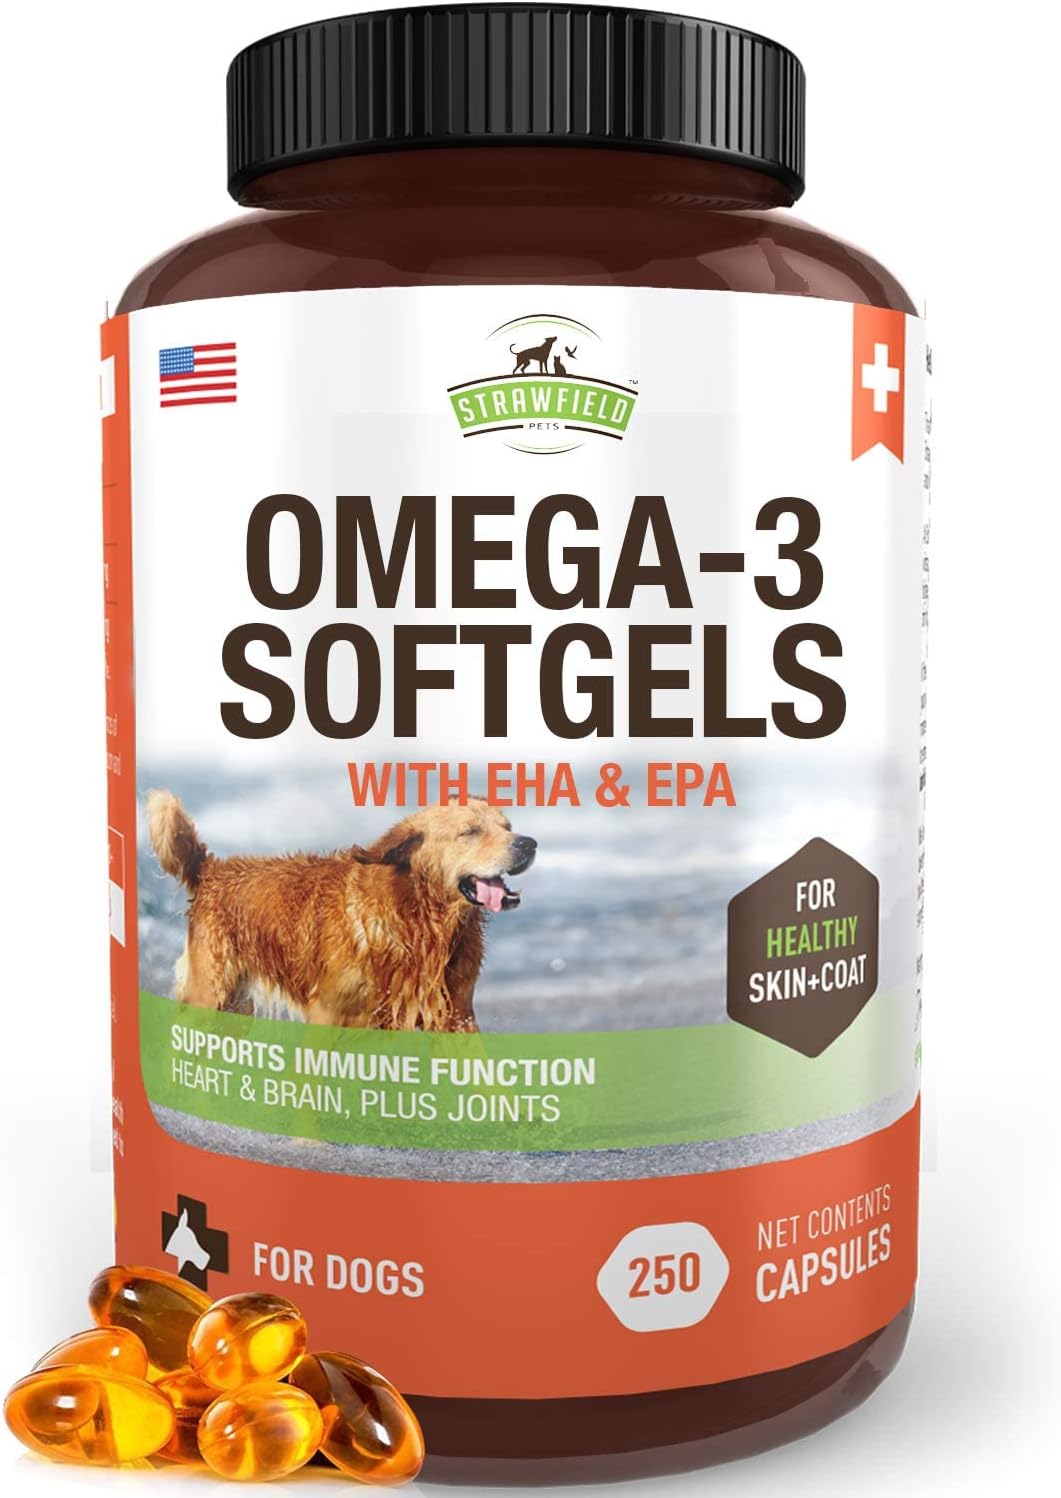 Strawfield Pets' Omega 3 Fish Oil for Dogs Dog Fish Oil Pet Supplement for Joint Support & Pain Relief Allergy Itch Shedding Healthy Coat Dry Itchy Skin Hot Spots USA 1000 mg EPA DHA 250 Softgel Pills